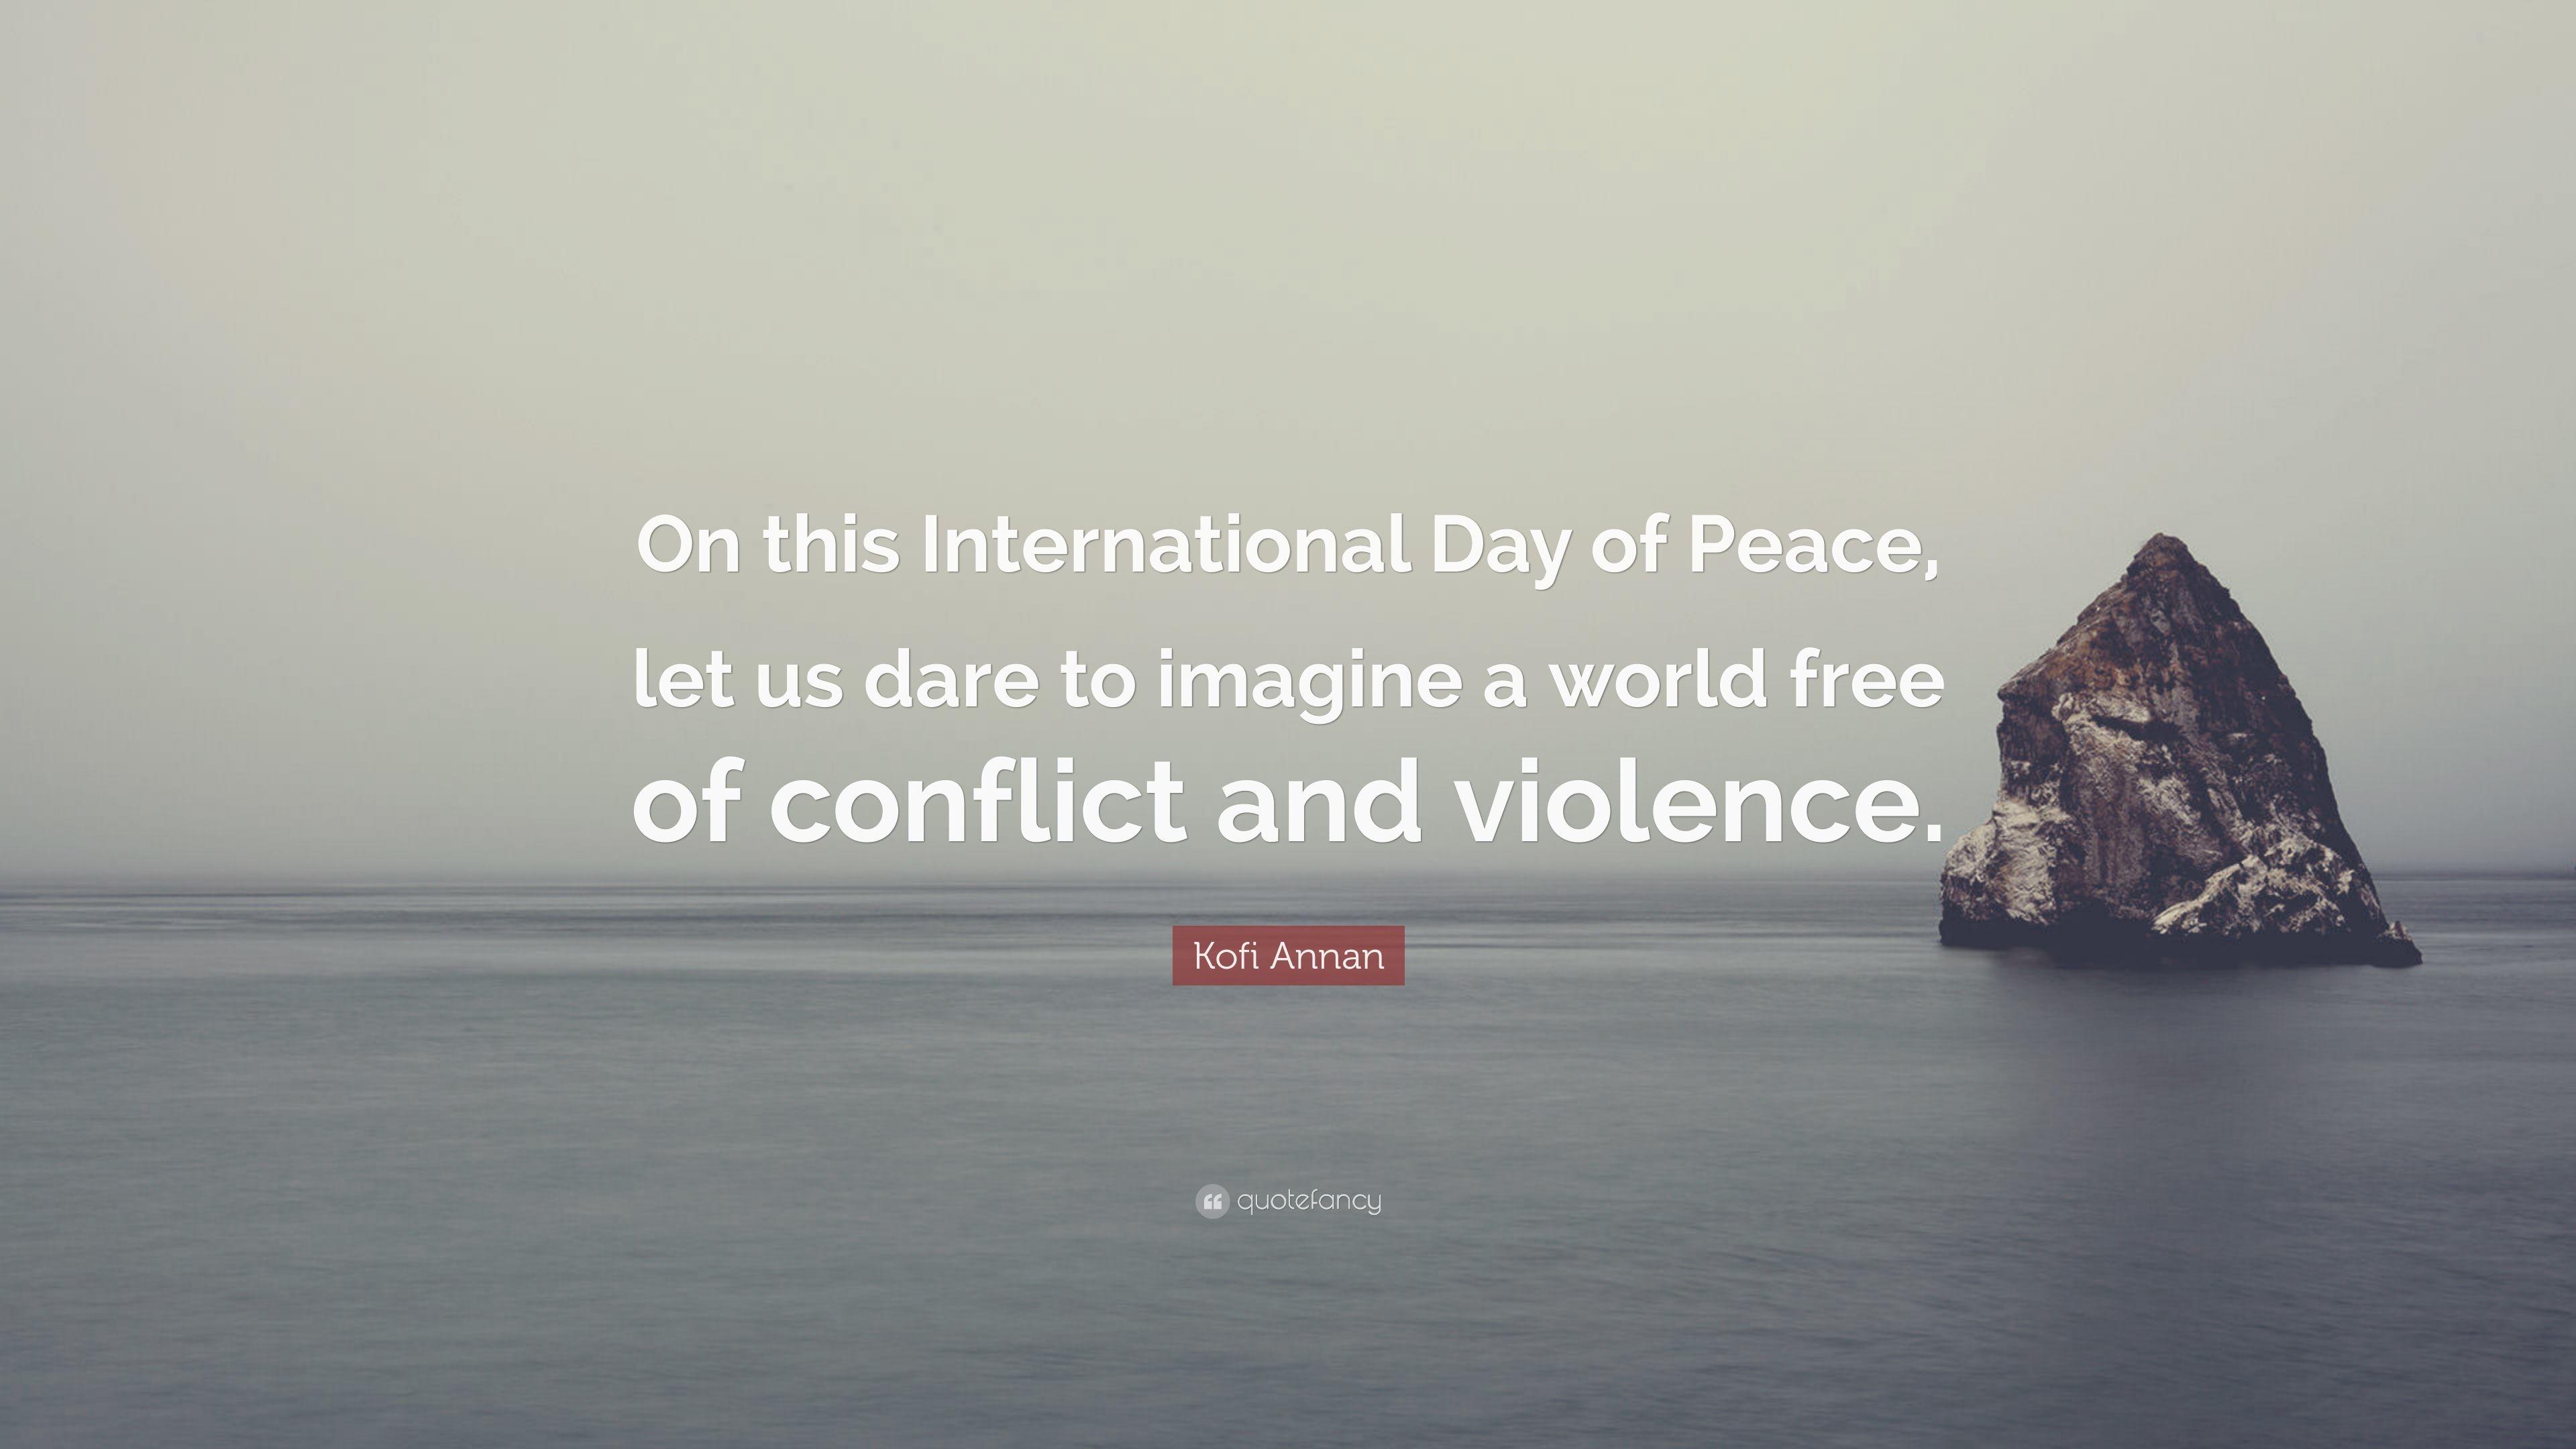 Kofi Annan Quote: “On this International Day of Peace, let us dare